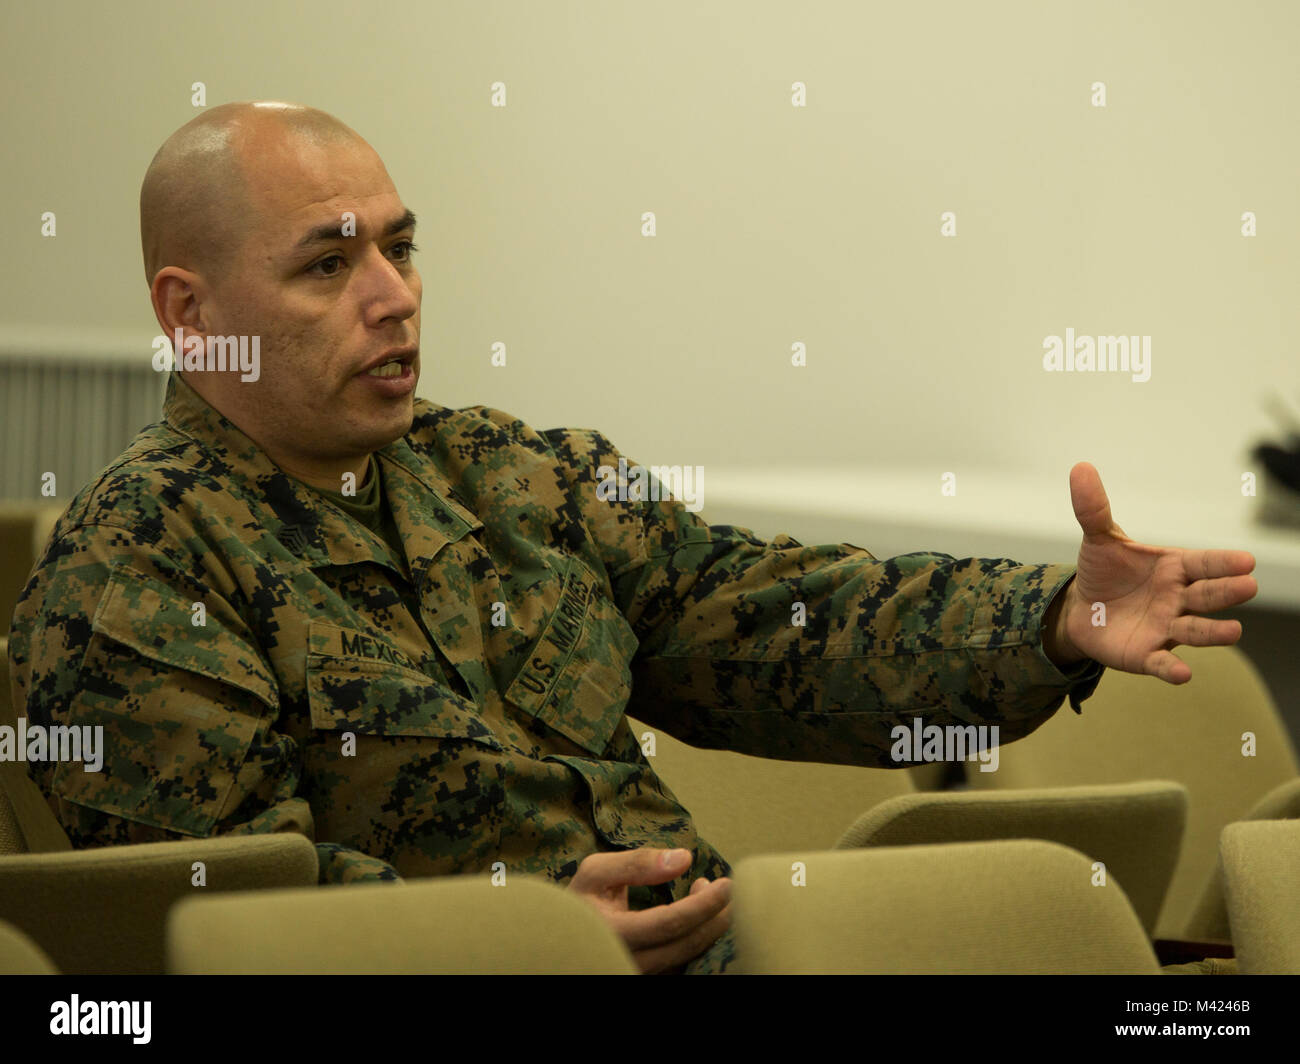 U.S. Marine Corps Staff Sgt. Victor Mexicano, the motor transportation section chief with Marine Wing Support Squadron (MWSS) 171, addresses the Pacific Theater Education Council (PTEC) board at Marine Corps Air Station Iwakuni, Japan, Feb. 9, 2018. PTEC reaches out to Department of Defense schools to help establish a quality education system for service members and their families. (U.S. Marine Corps photo by Lance Cpl. Mason Roy) Stock Photo